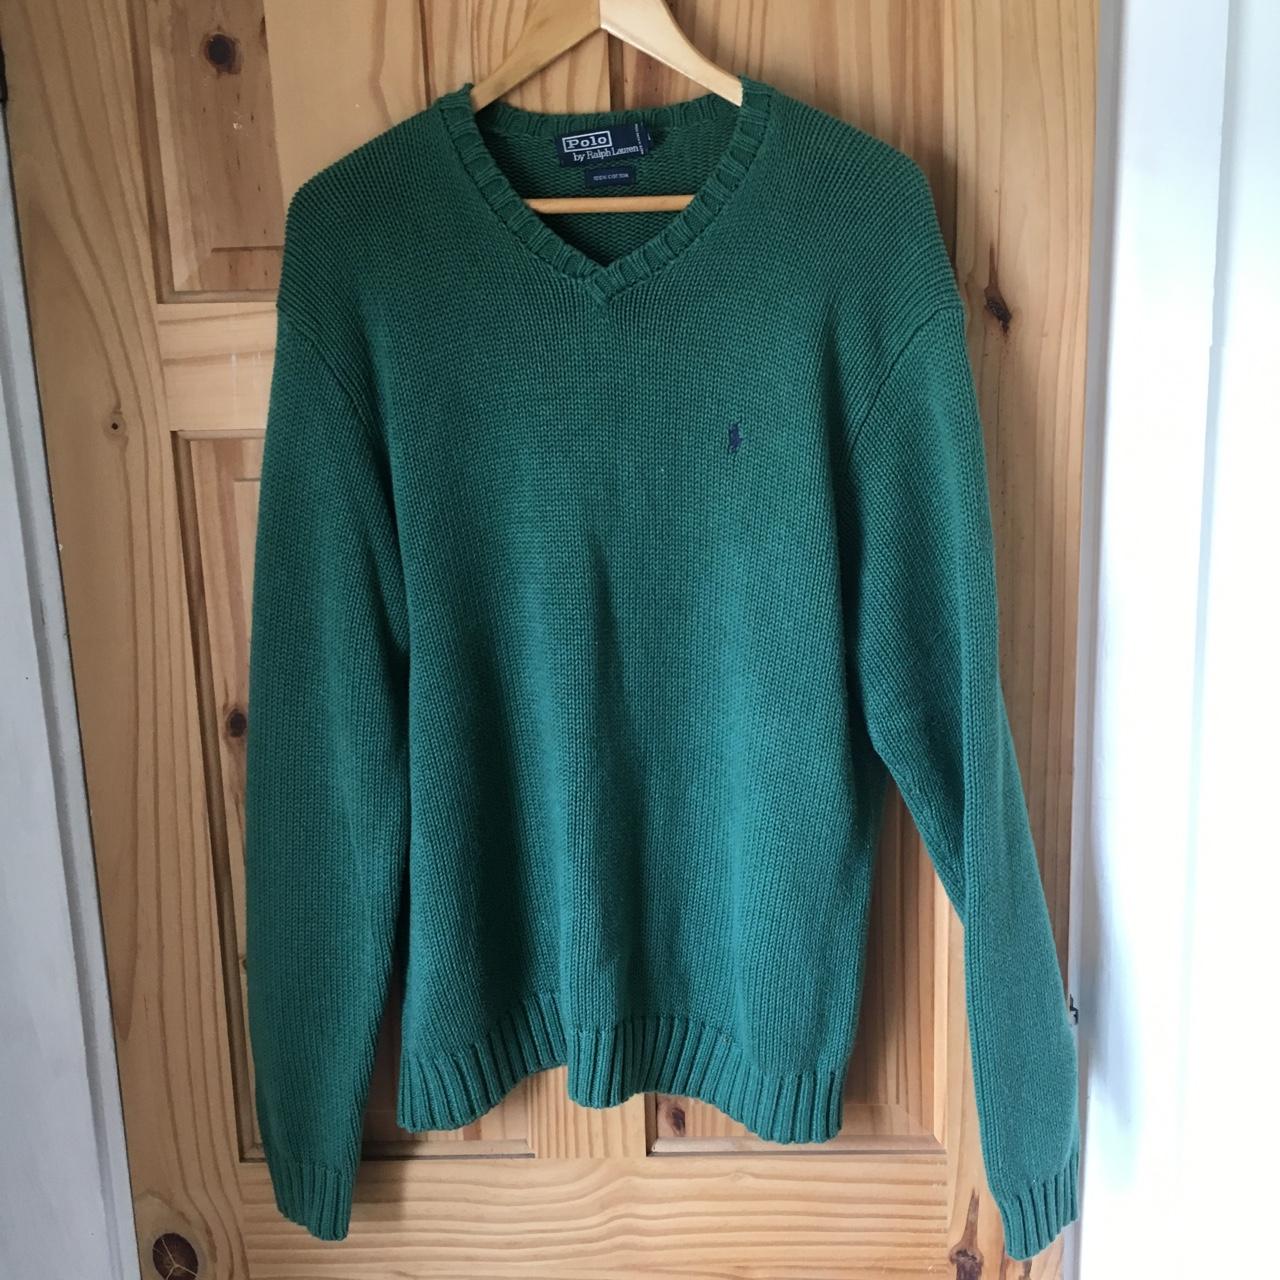 Vintage thick Ralph Lauren sweater in green size large - Depop